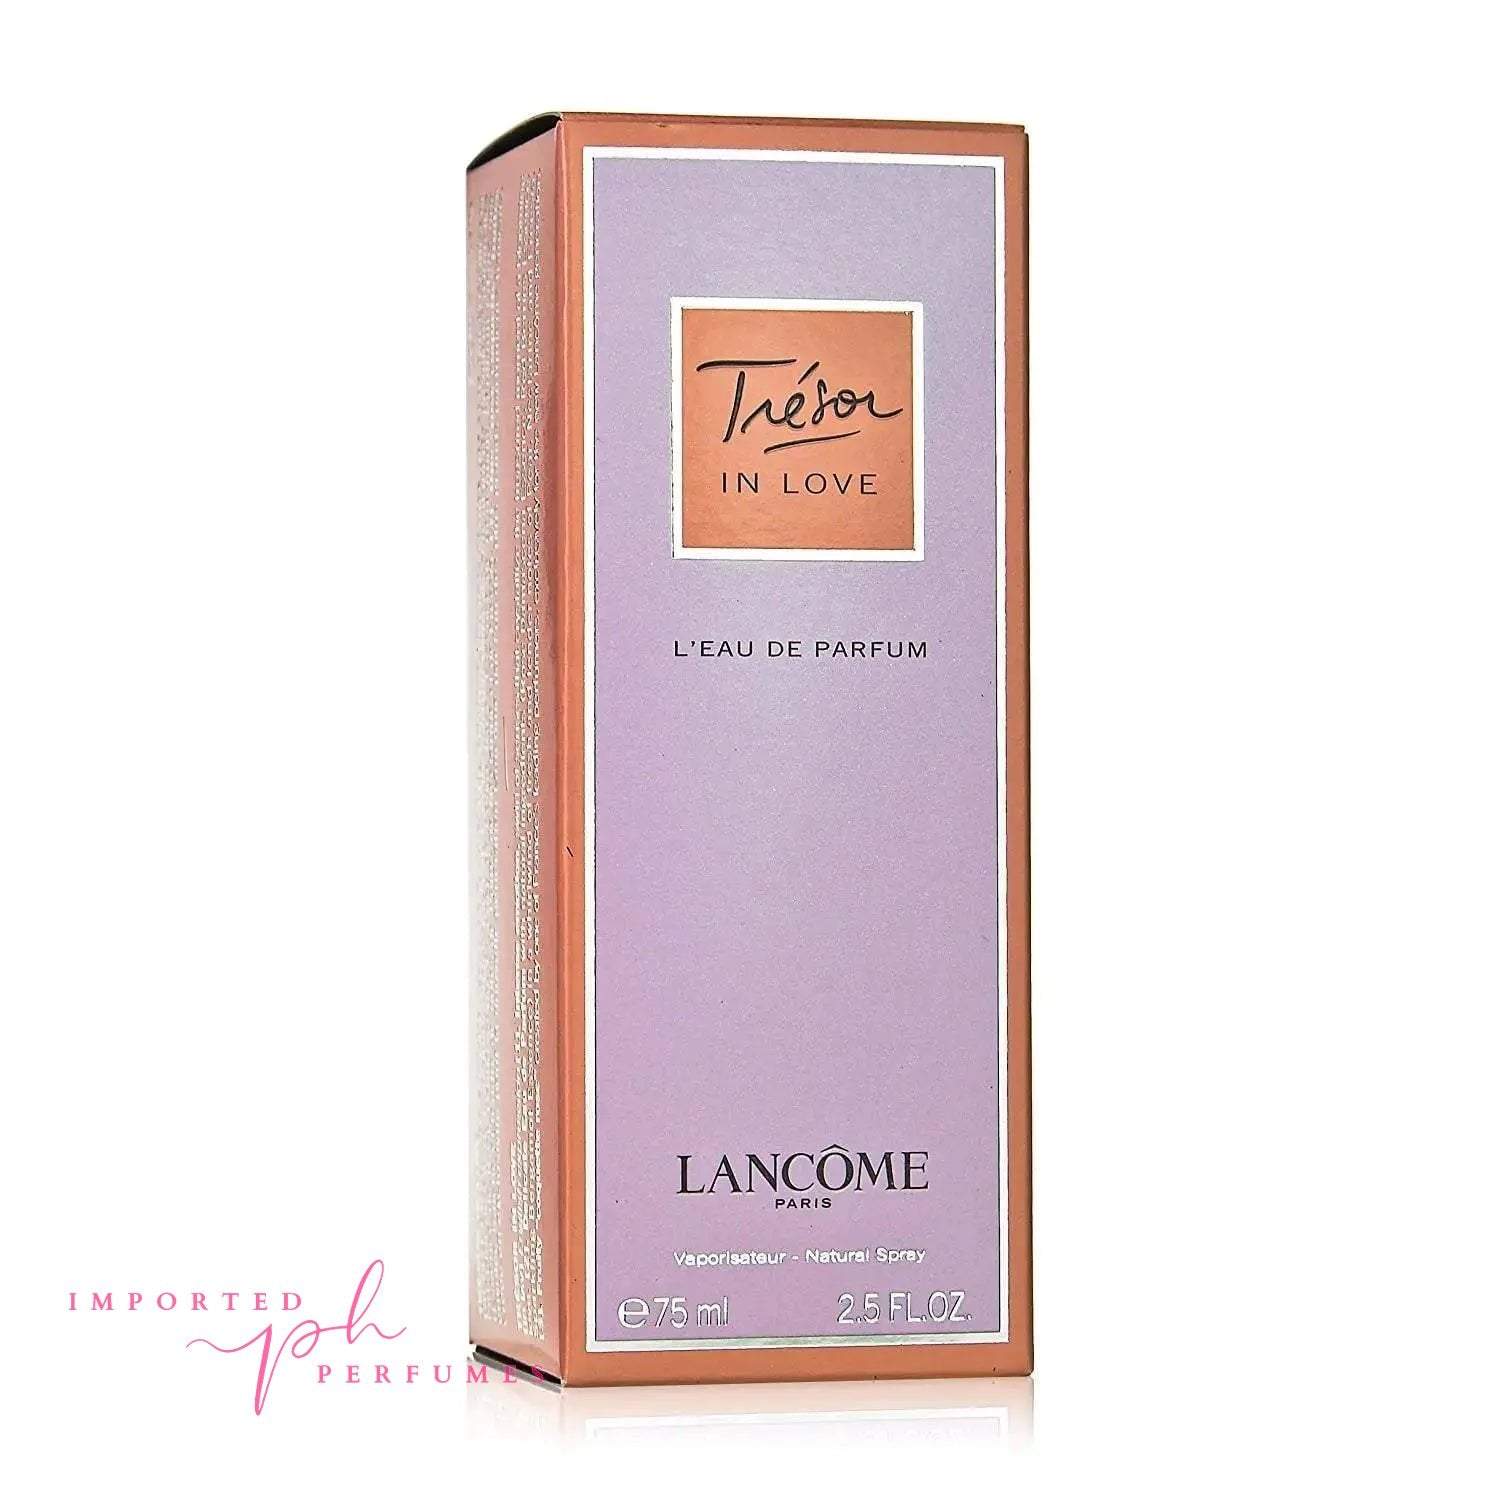 [TESTER] Lancome Tresor In Love Eau de Parfum 75ml-Imported Perfumes Co-for women,In love,lancome,TESTER,tresor,women,Women perfume